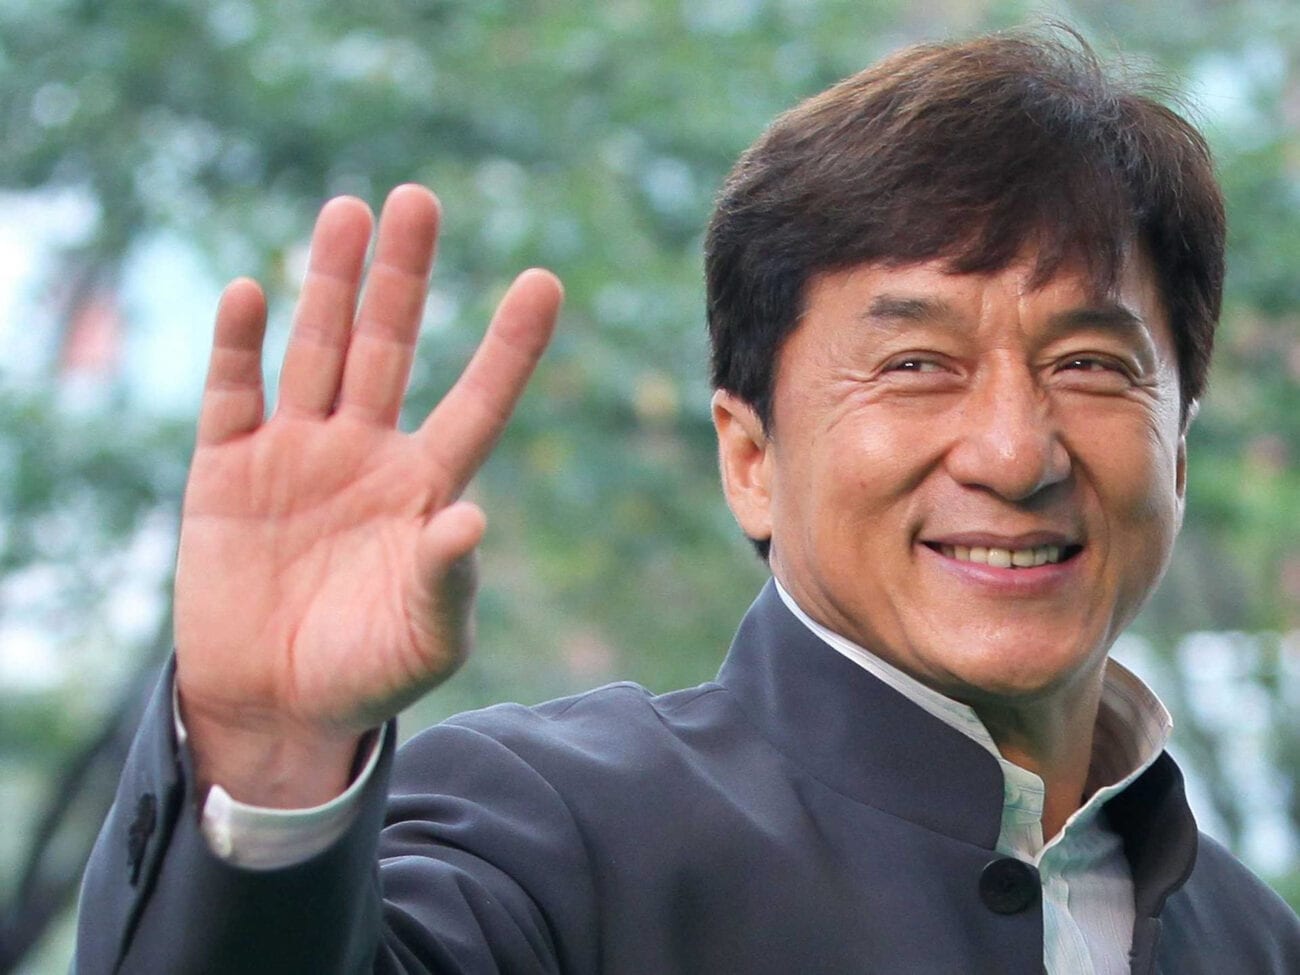 From the gritty thriller 'Rush Hour', to the action comedy 'Who Am I?', Jackie Chan’s movies has something for everyone. Here are the best movies.